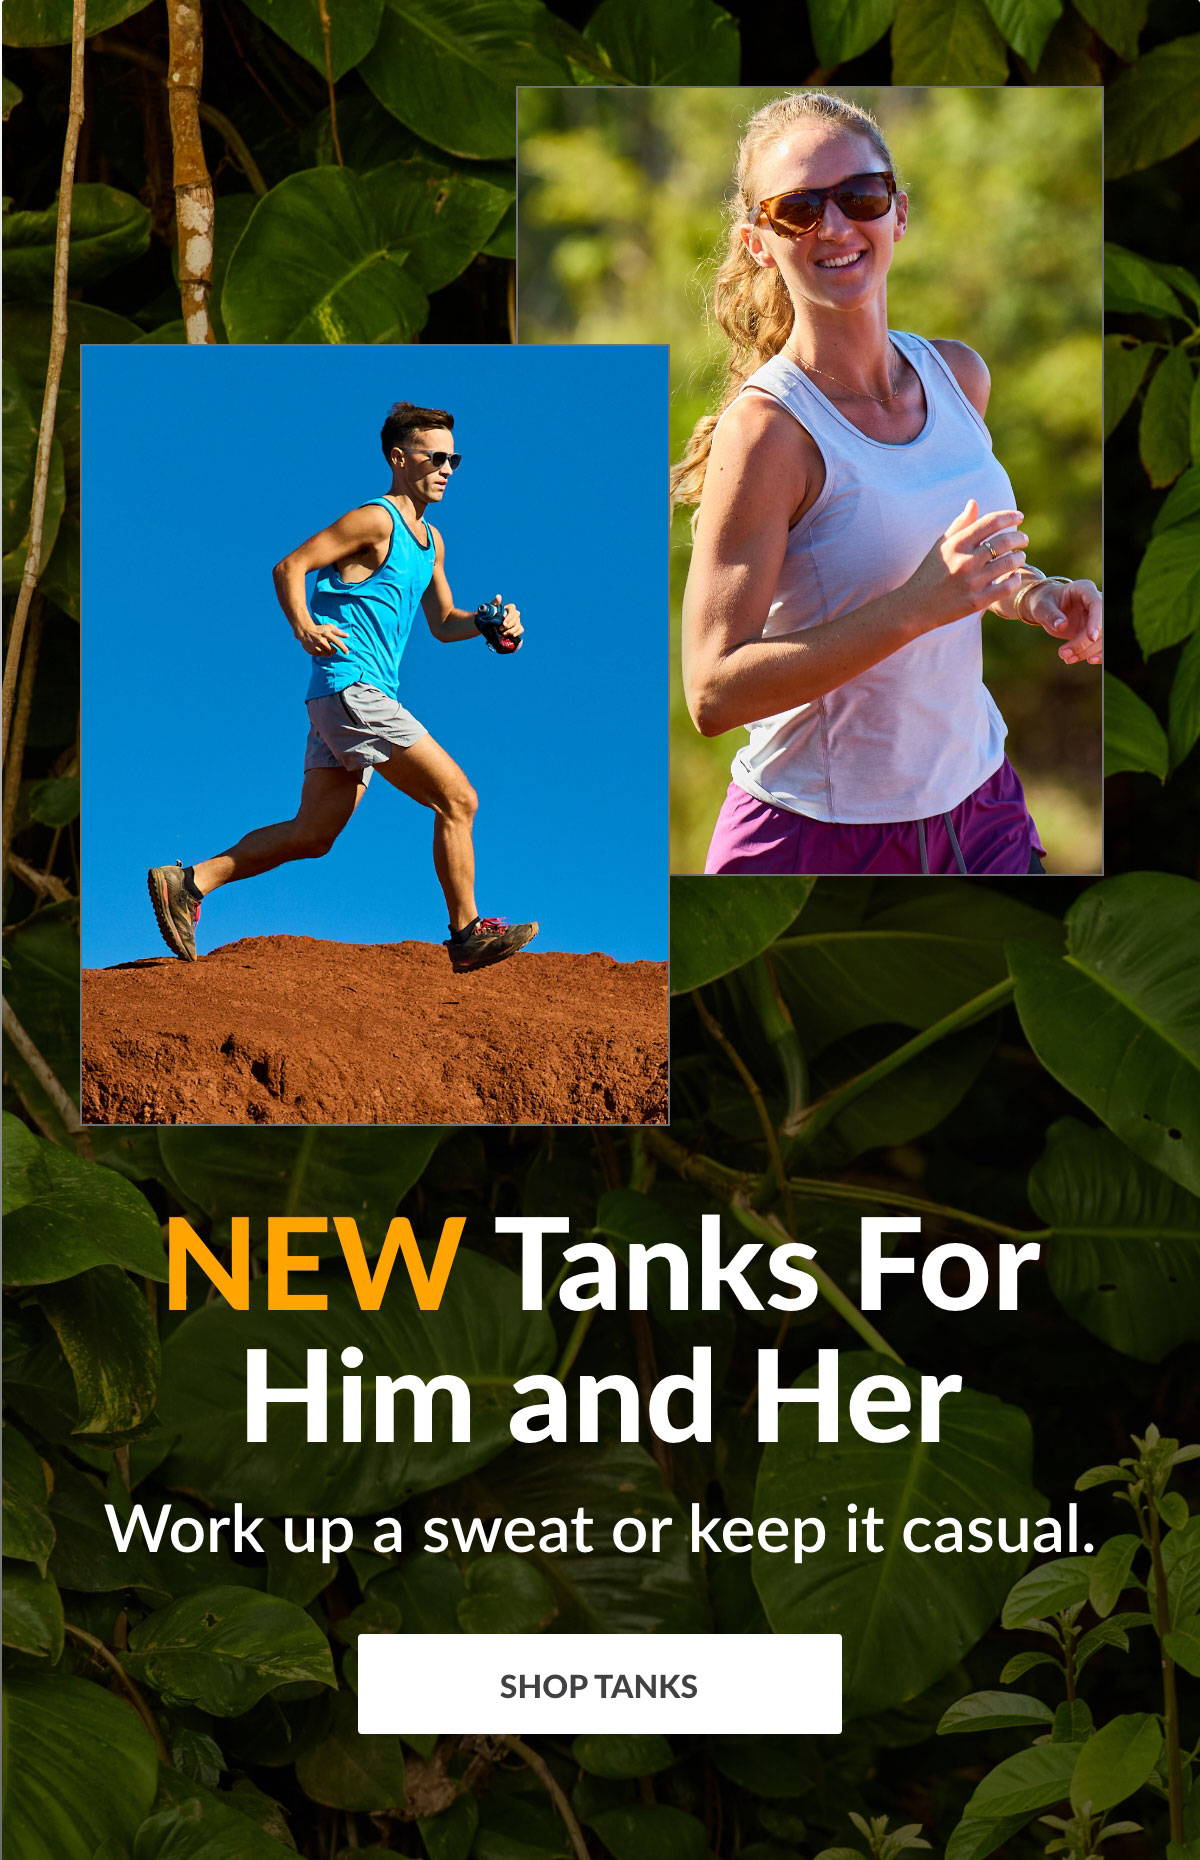 NEW Tanks for Him and Her - Work up a sweat or keep it casual - Shop Tanks